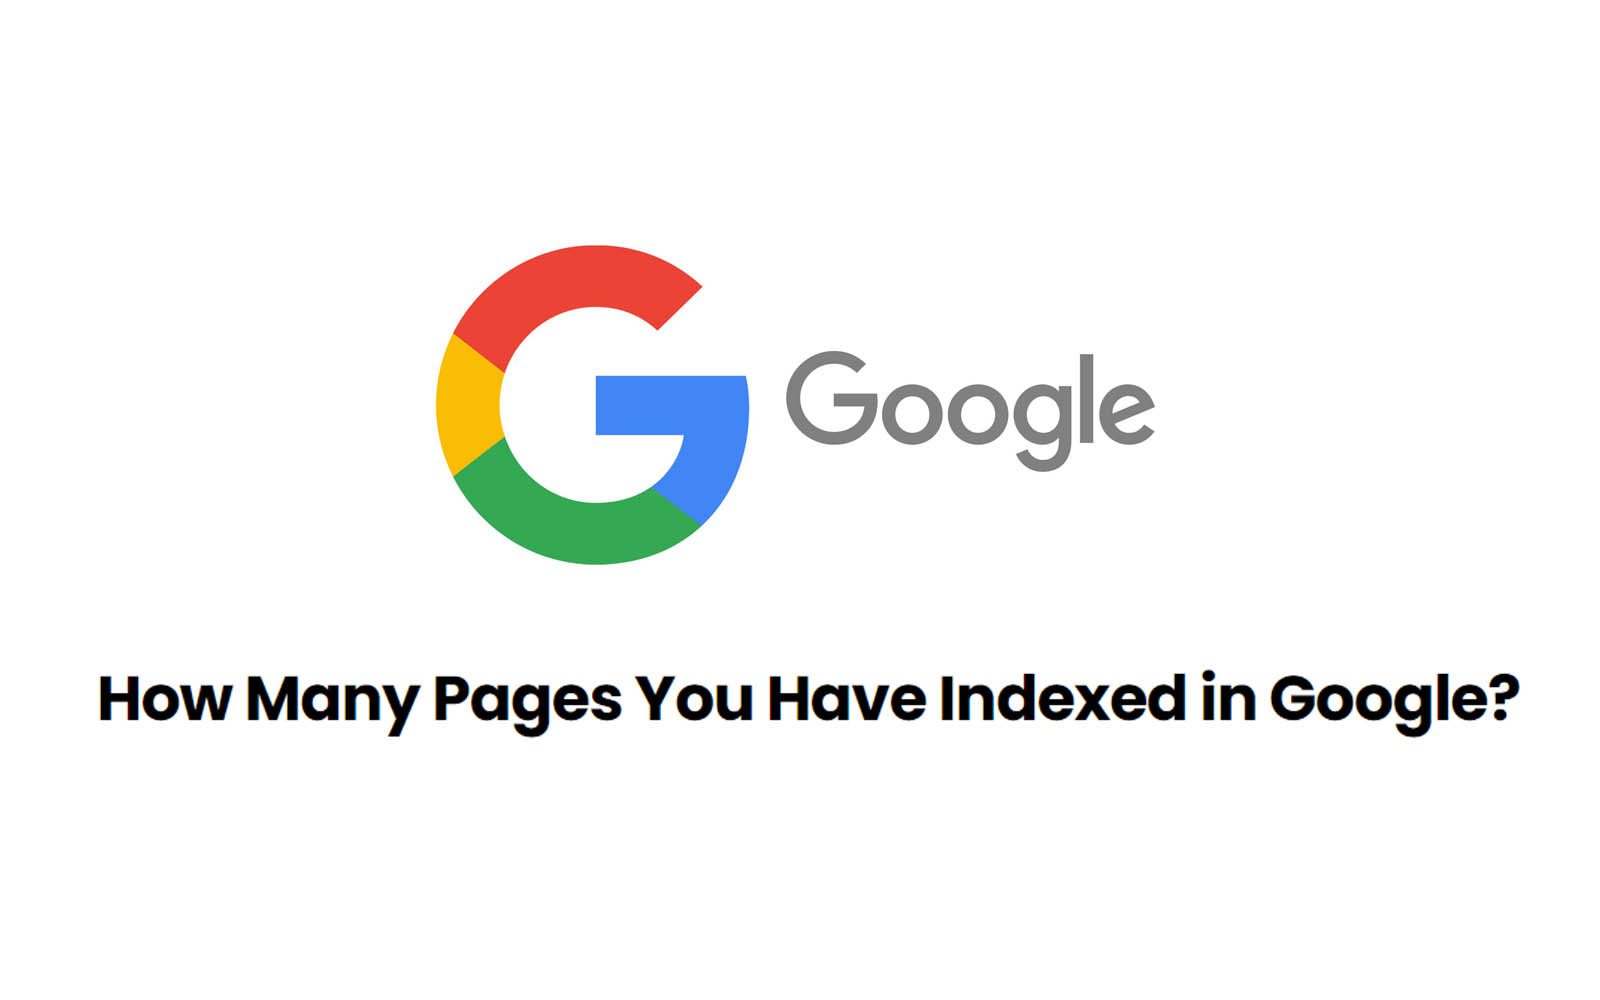 How Many Pages You Have Indexed in Google?